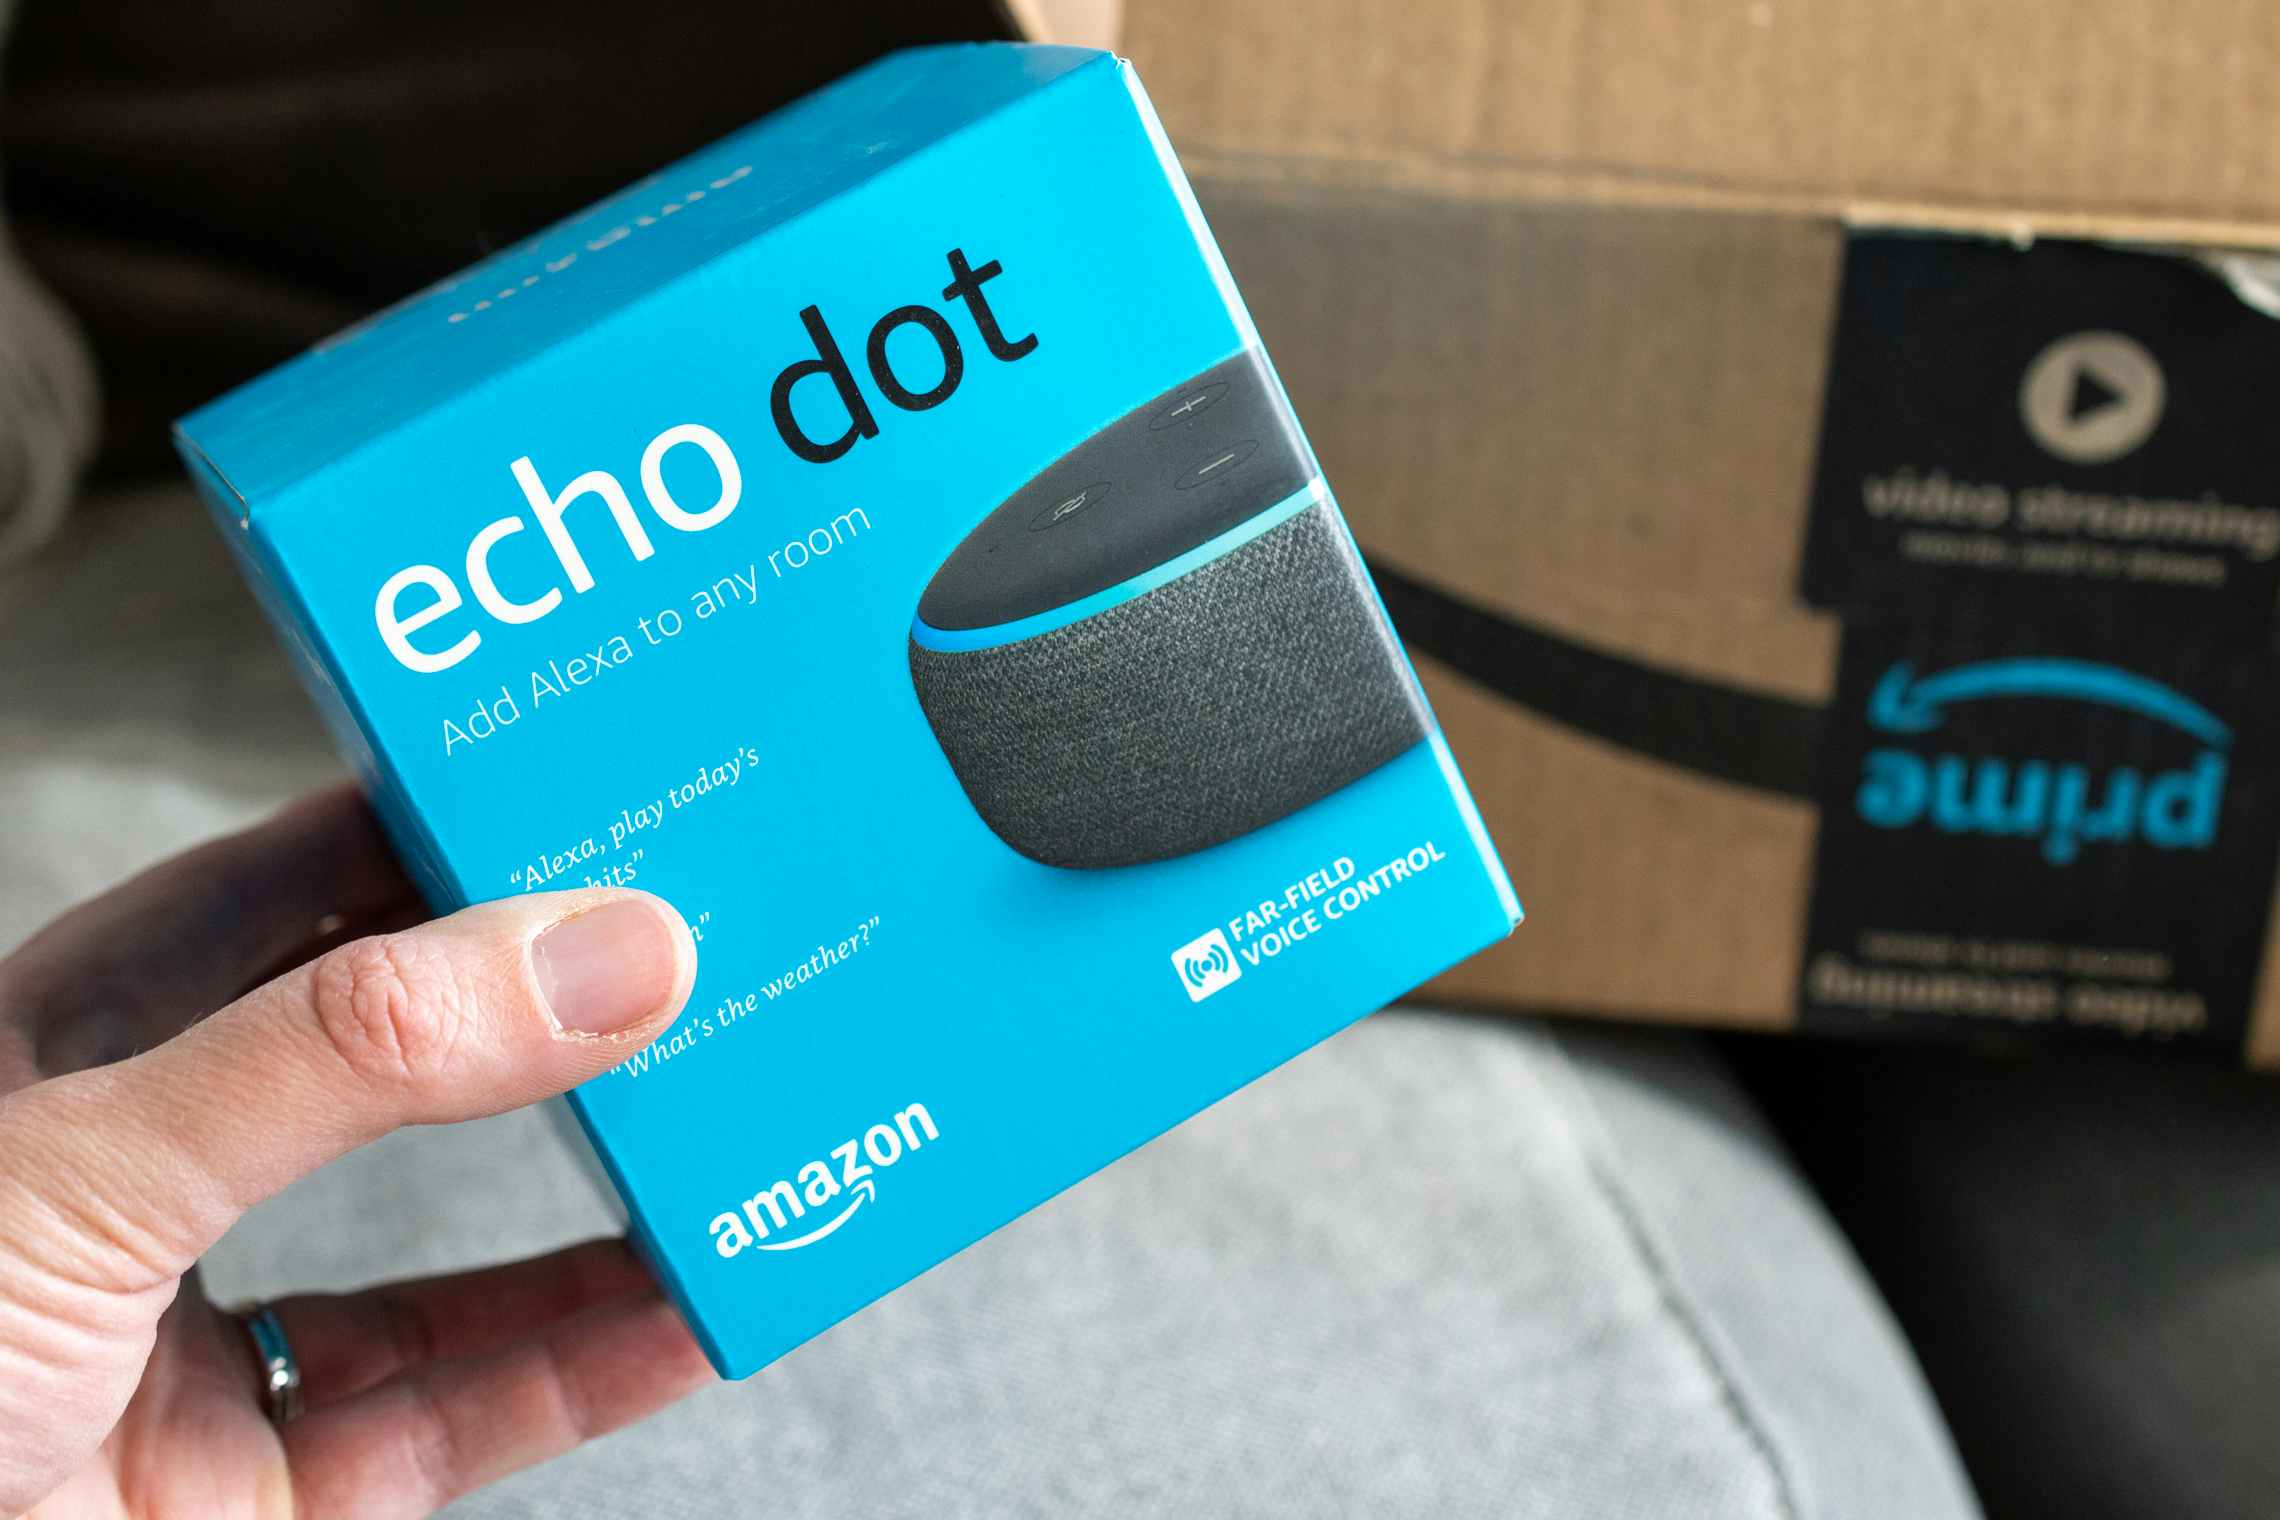 An Amazon Echo Dot in front of an open delivery box.